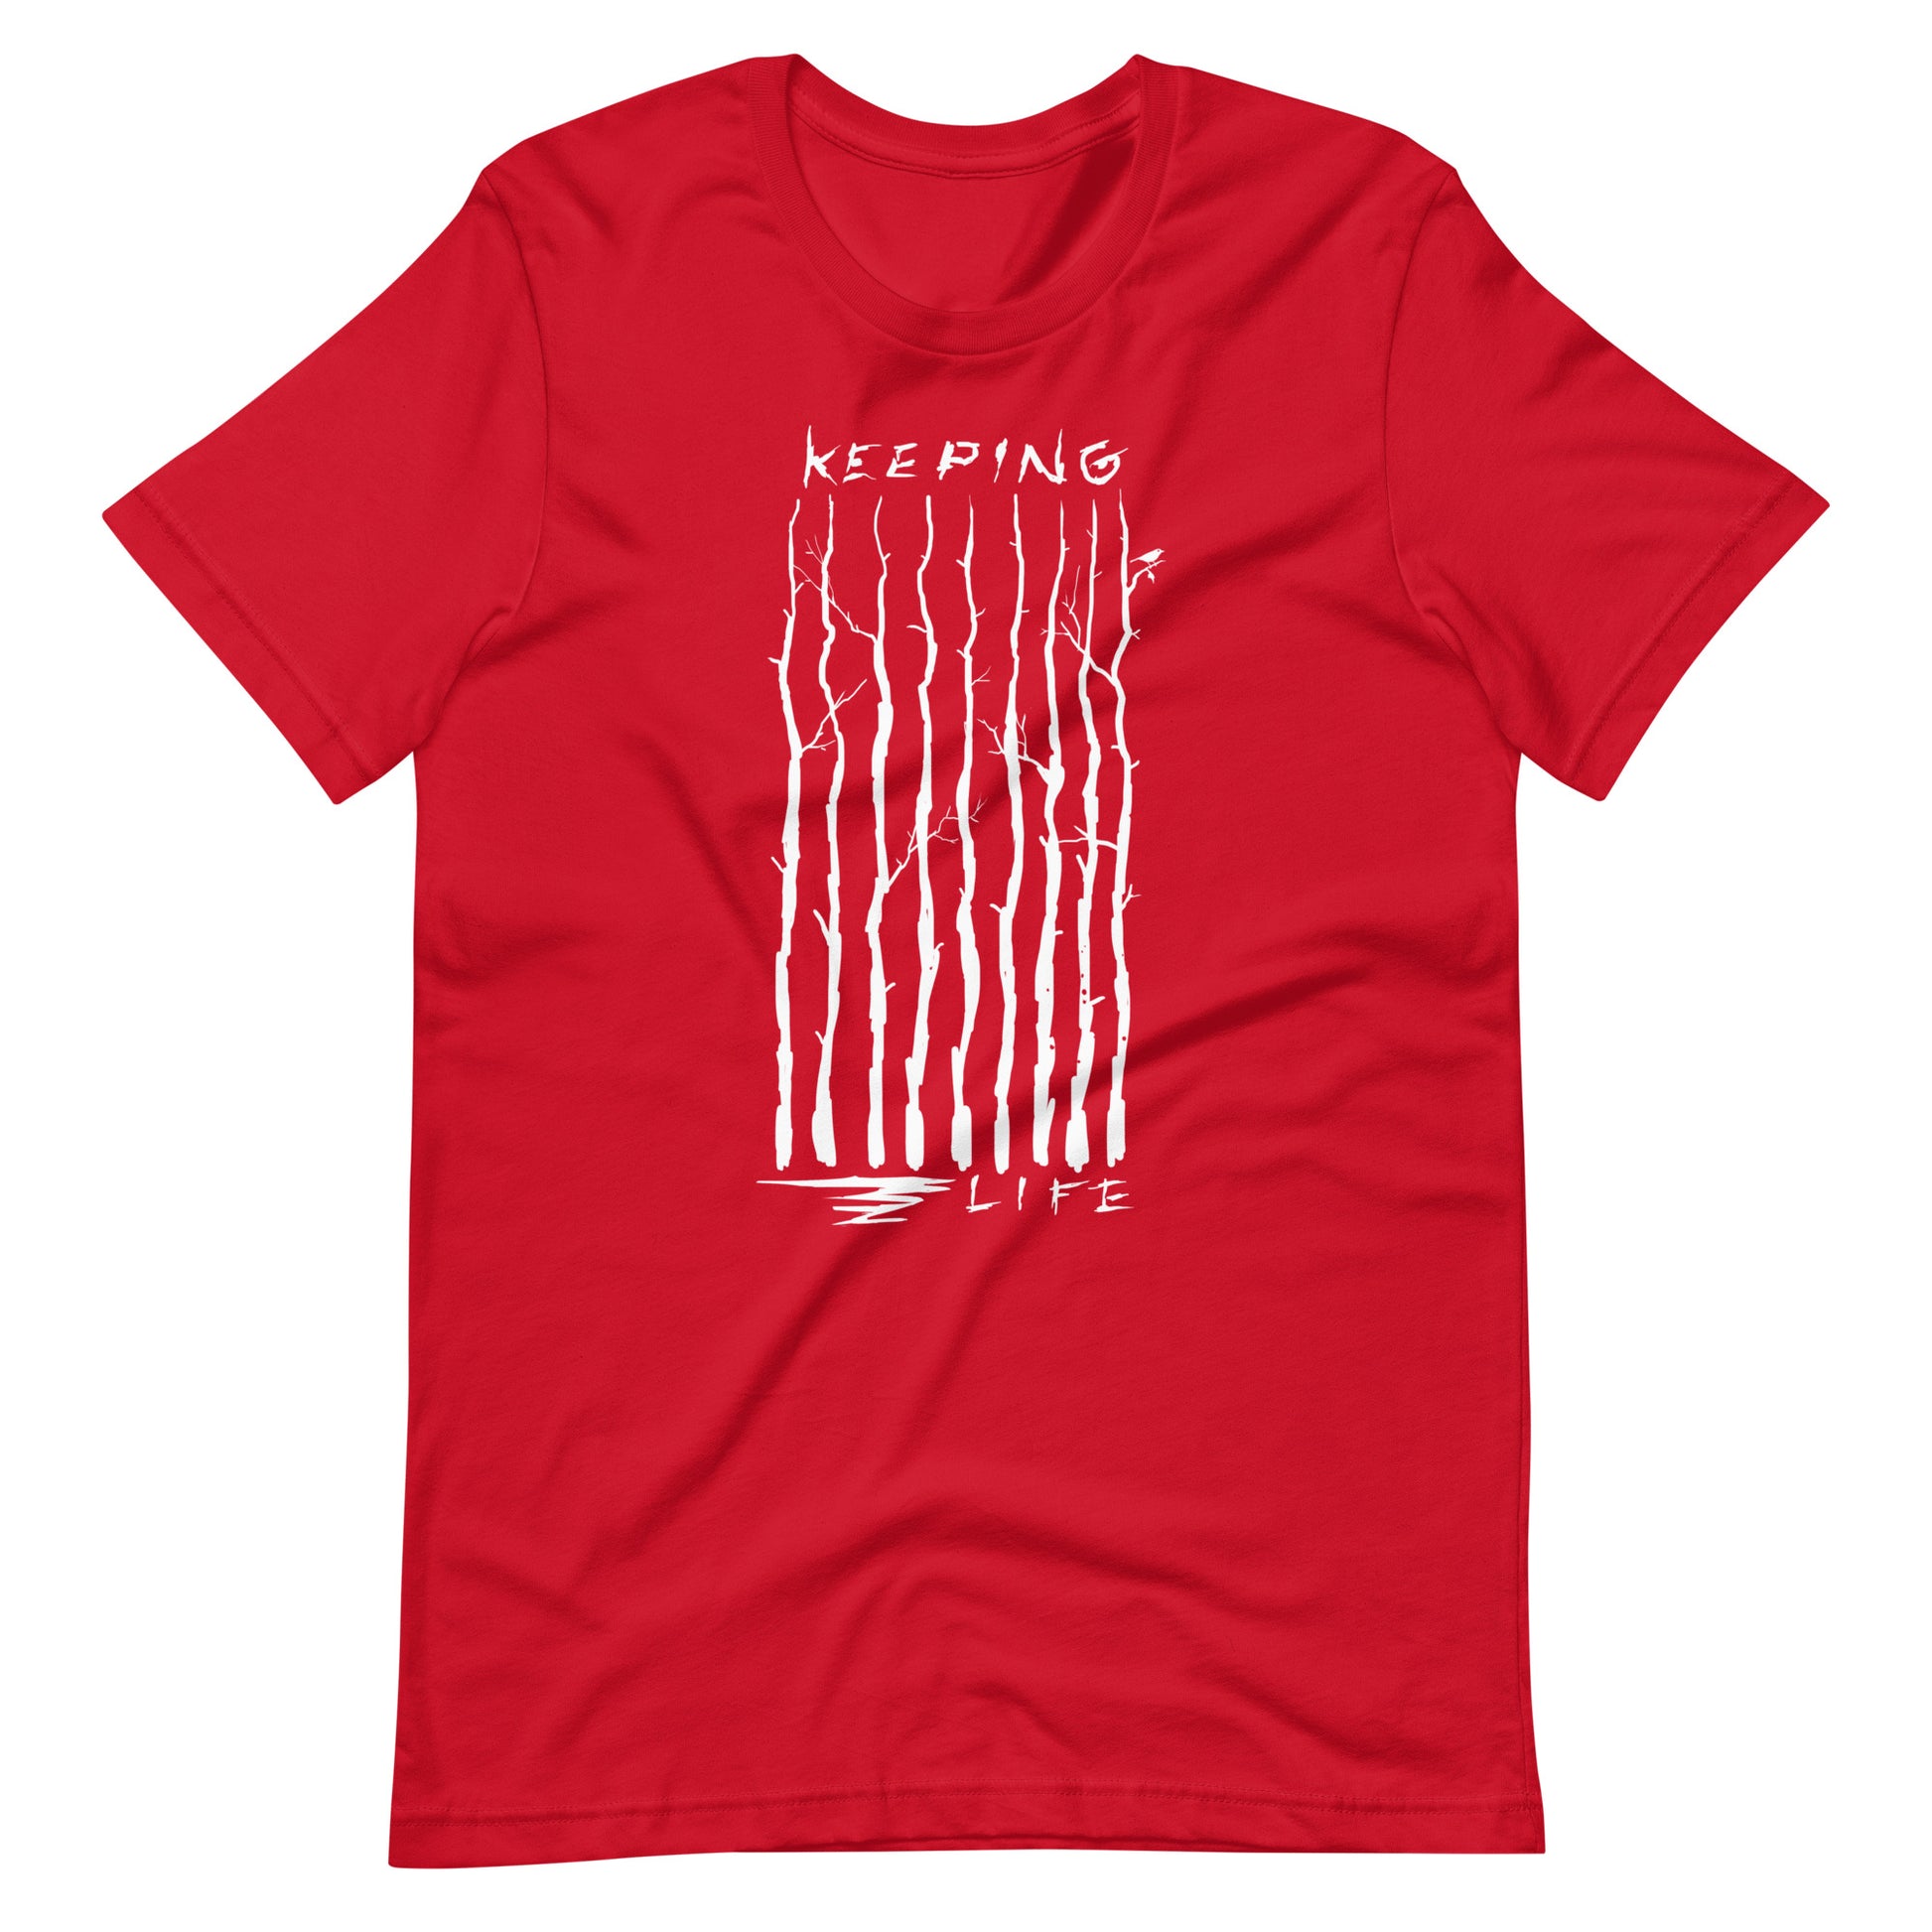 Keeping Lift - Men's t-shirt - Red Front